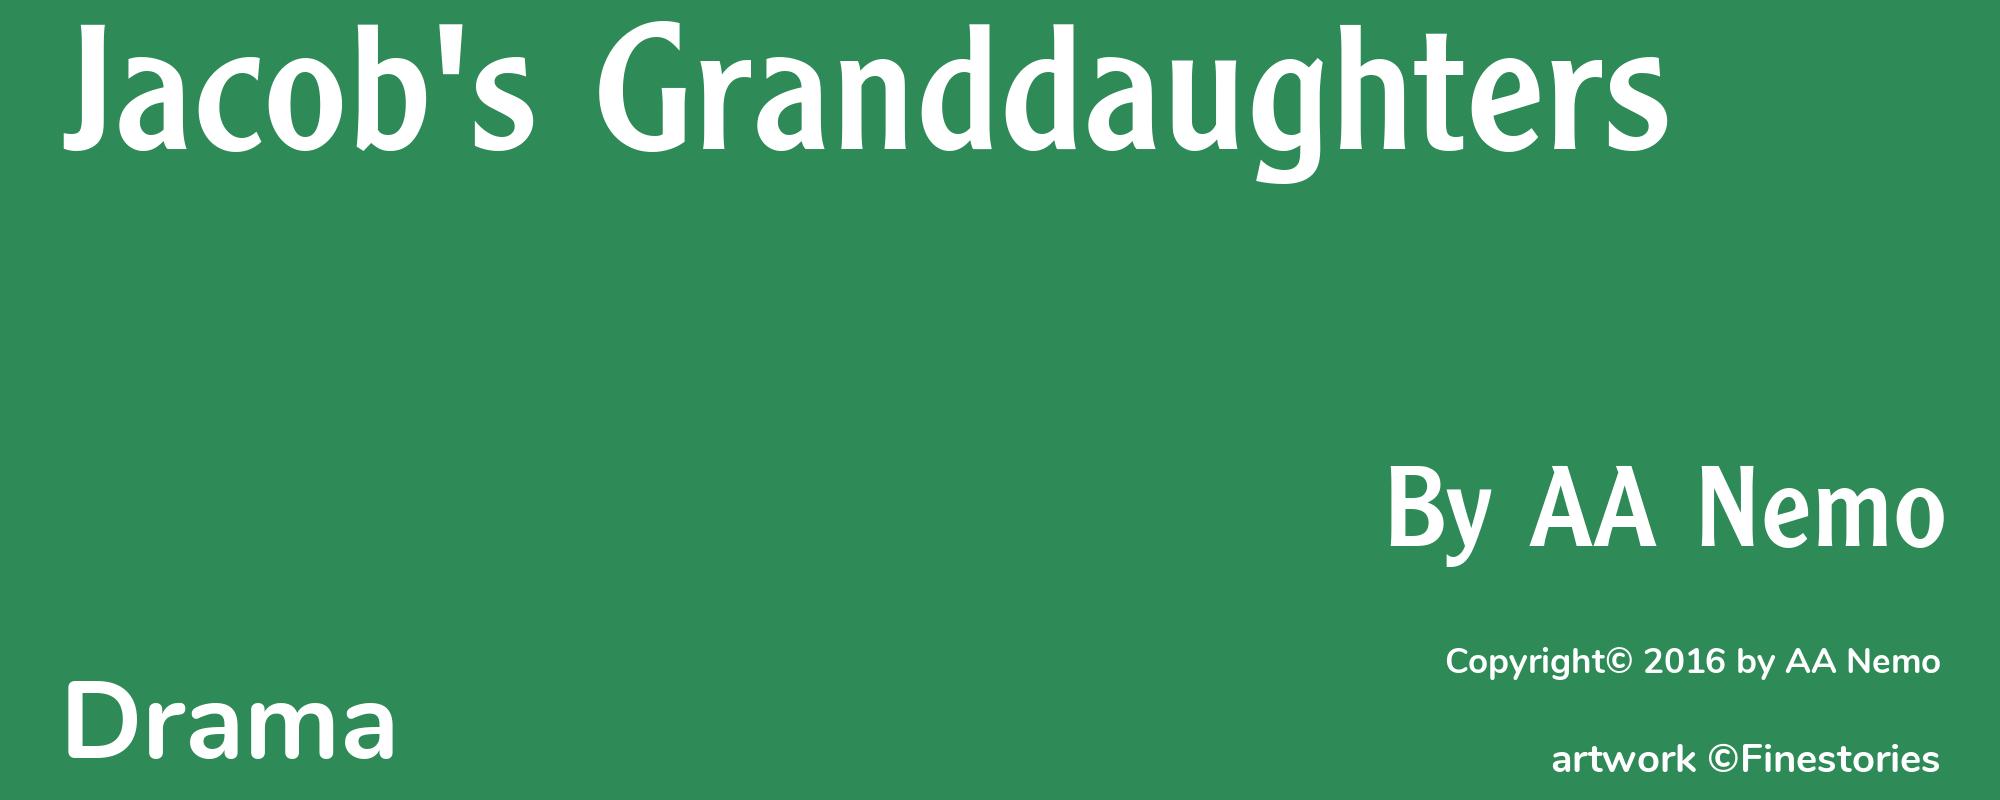 Jacob's Granddaughters - Cover